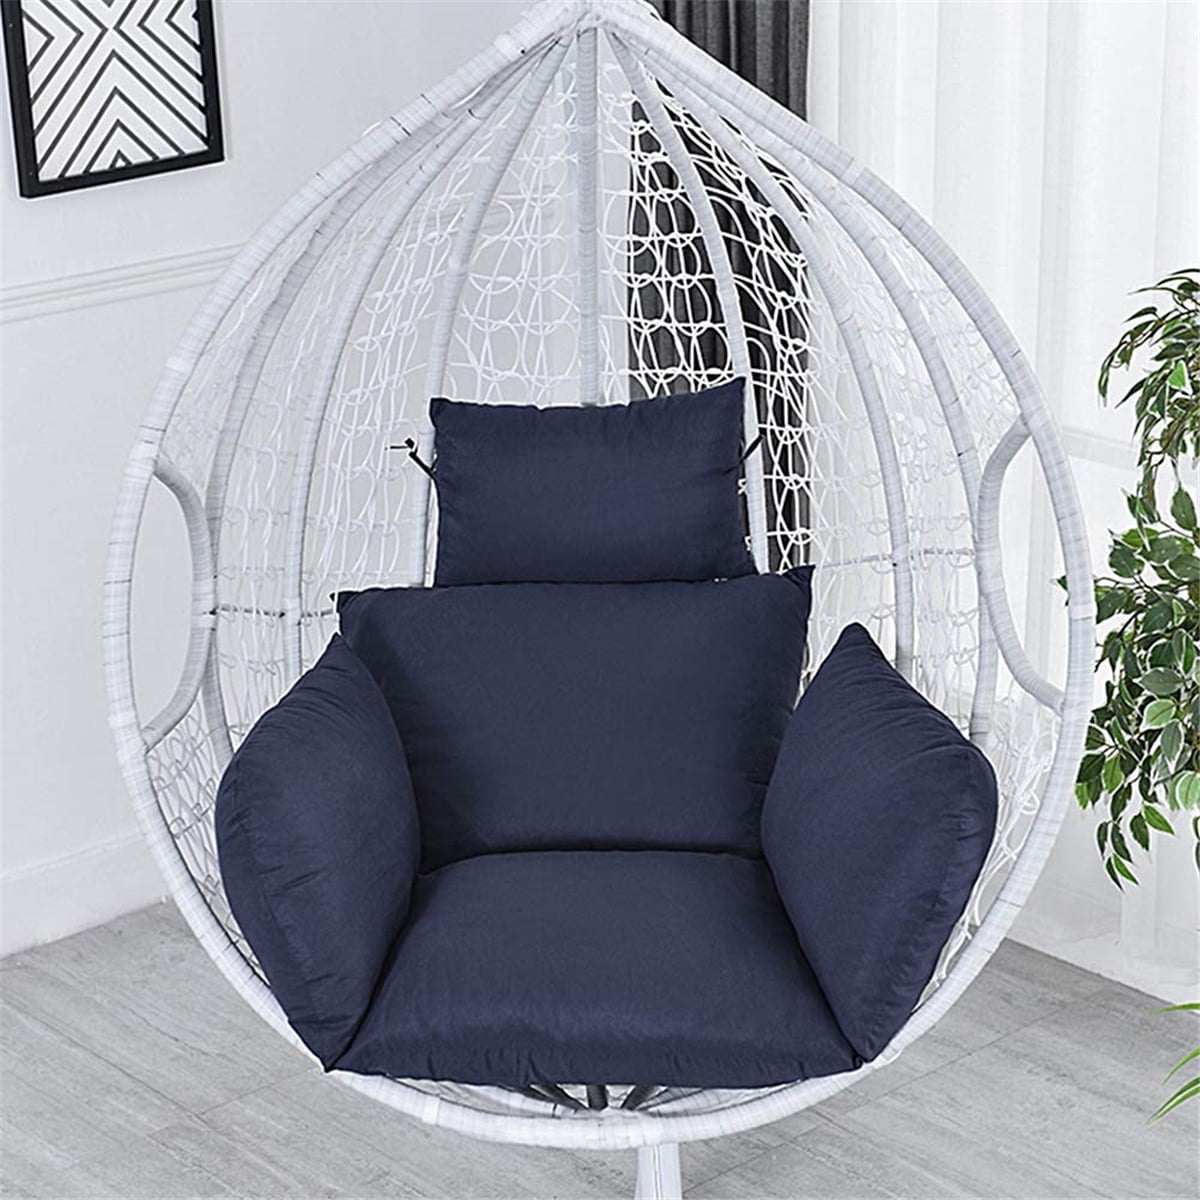 Thicken Swing Chair Egg Chair Cushion hook.s Hanging Relax Chair Pads Outdoor Wicker Rattan Hanging Seat Cushion Hanging Basket Seat Pad For for Indoor Only Cushion